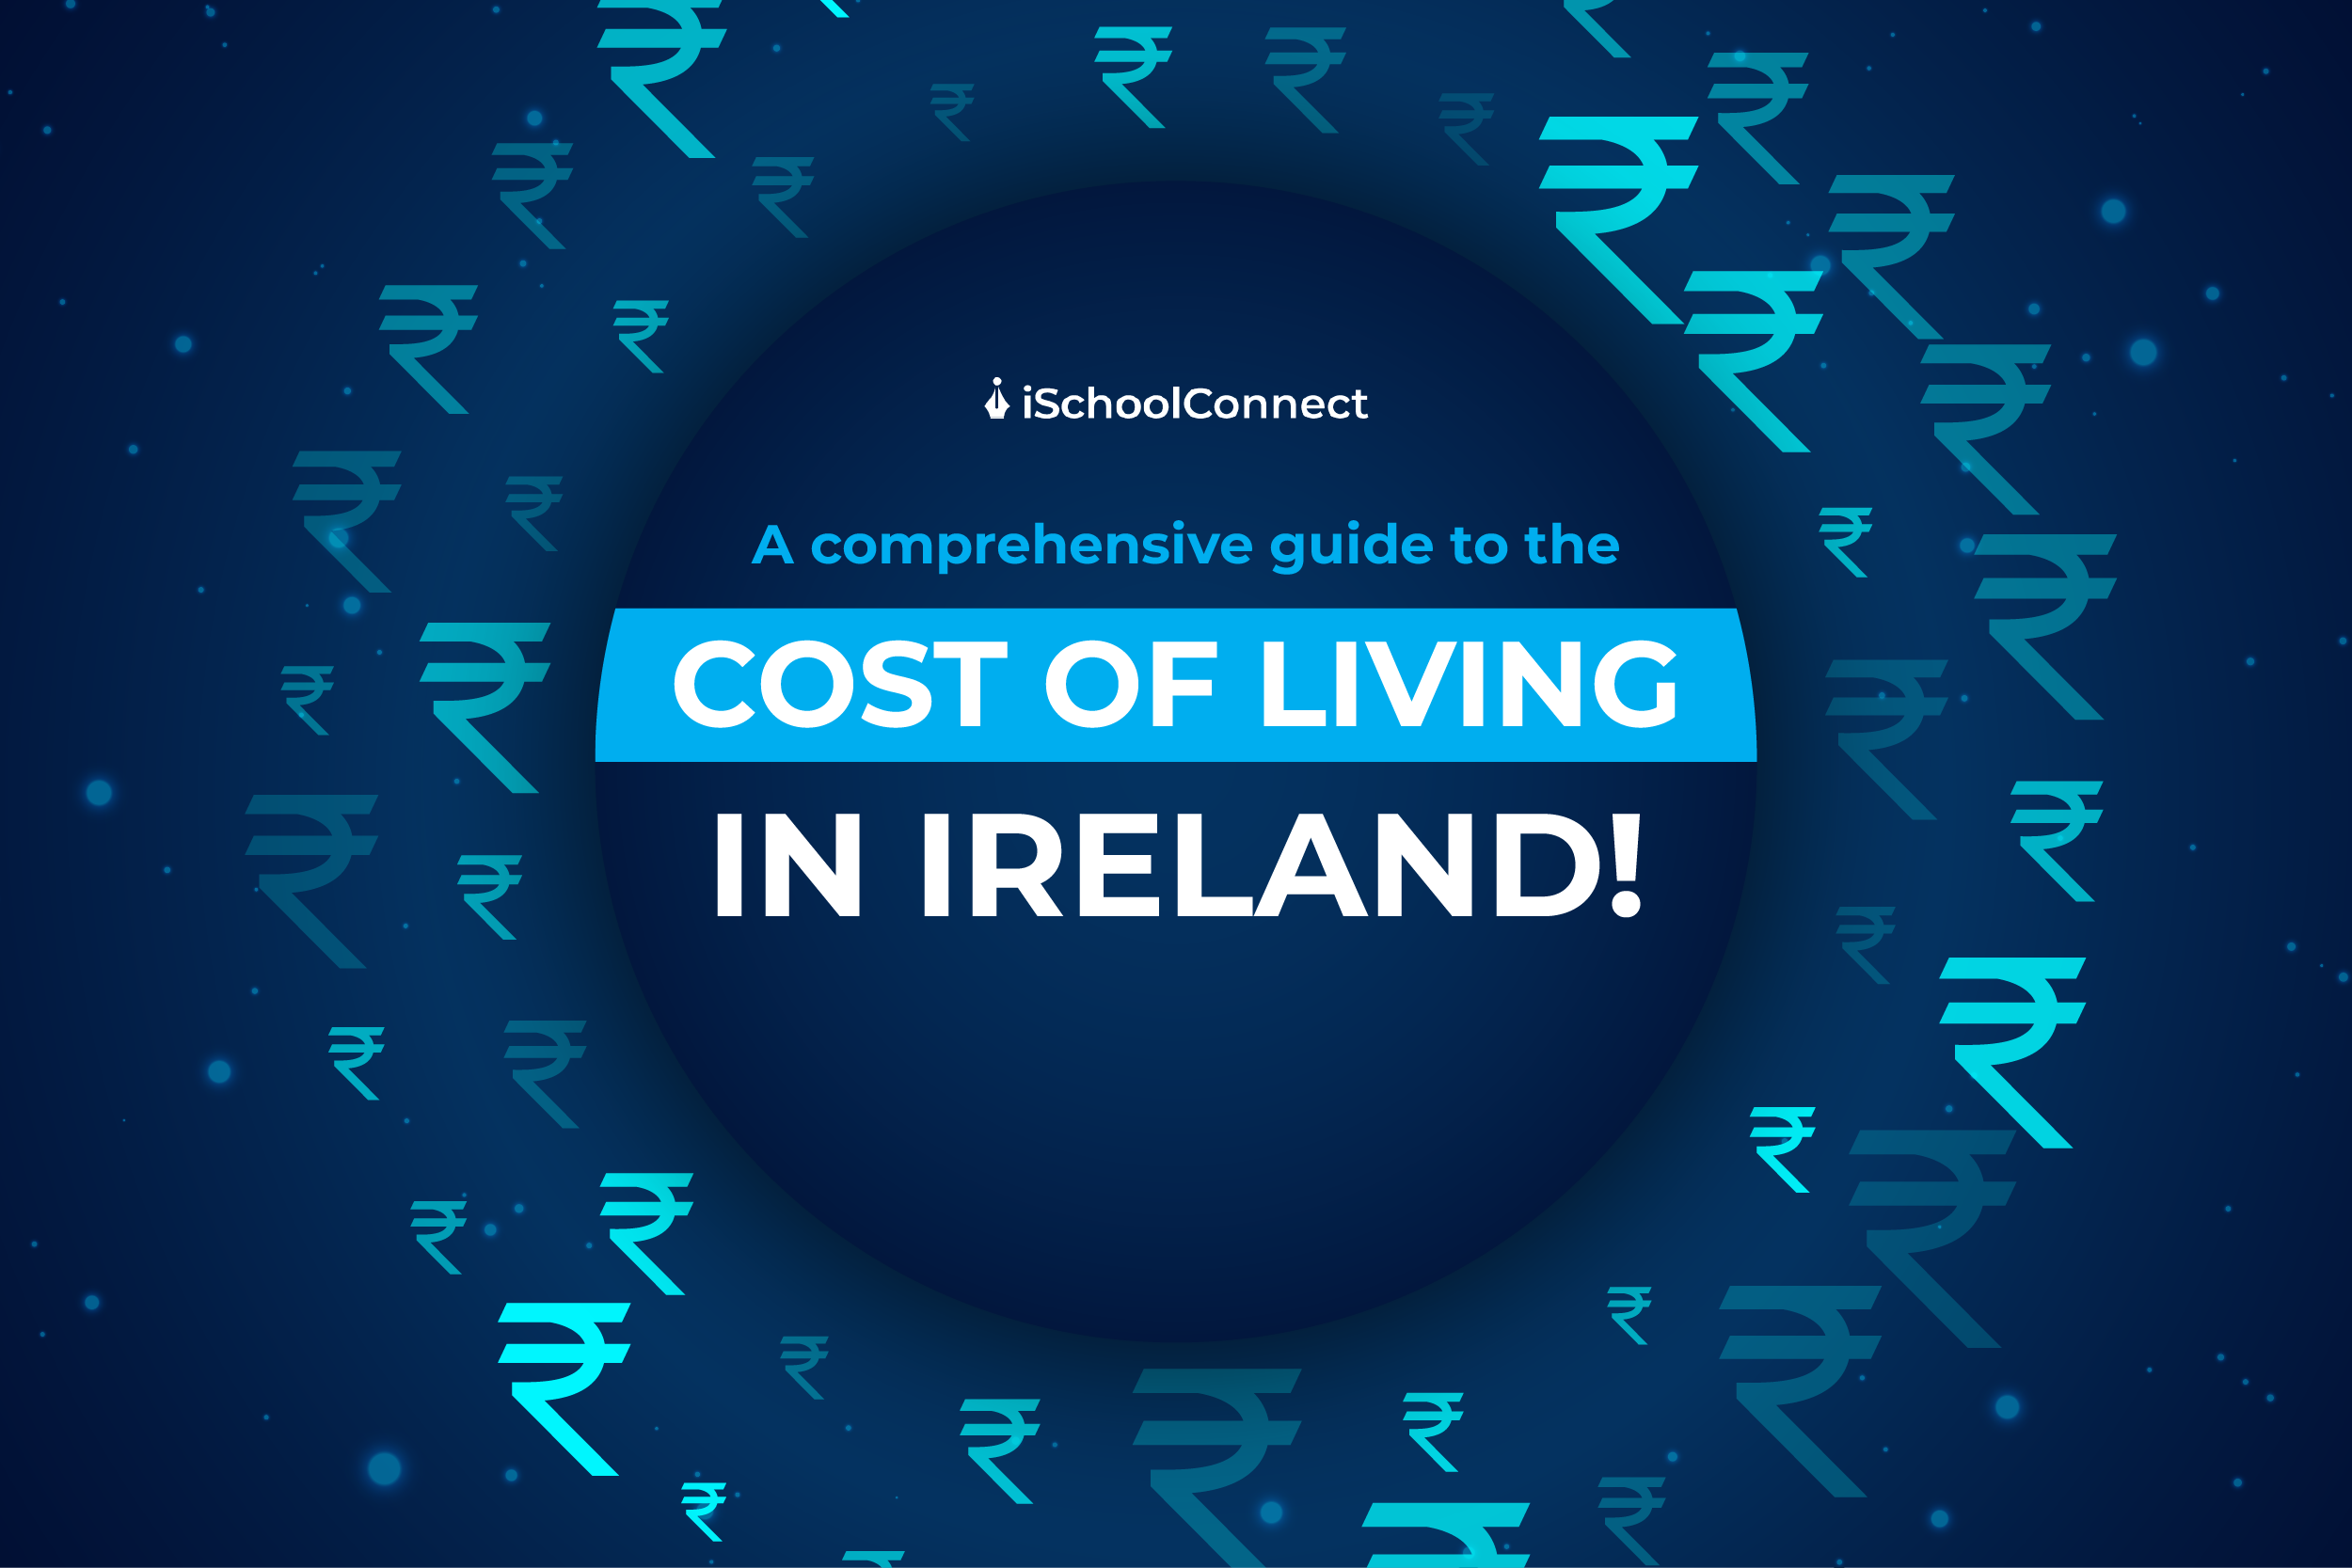 Your handy guide to the cost of living in Ireland